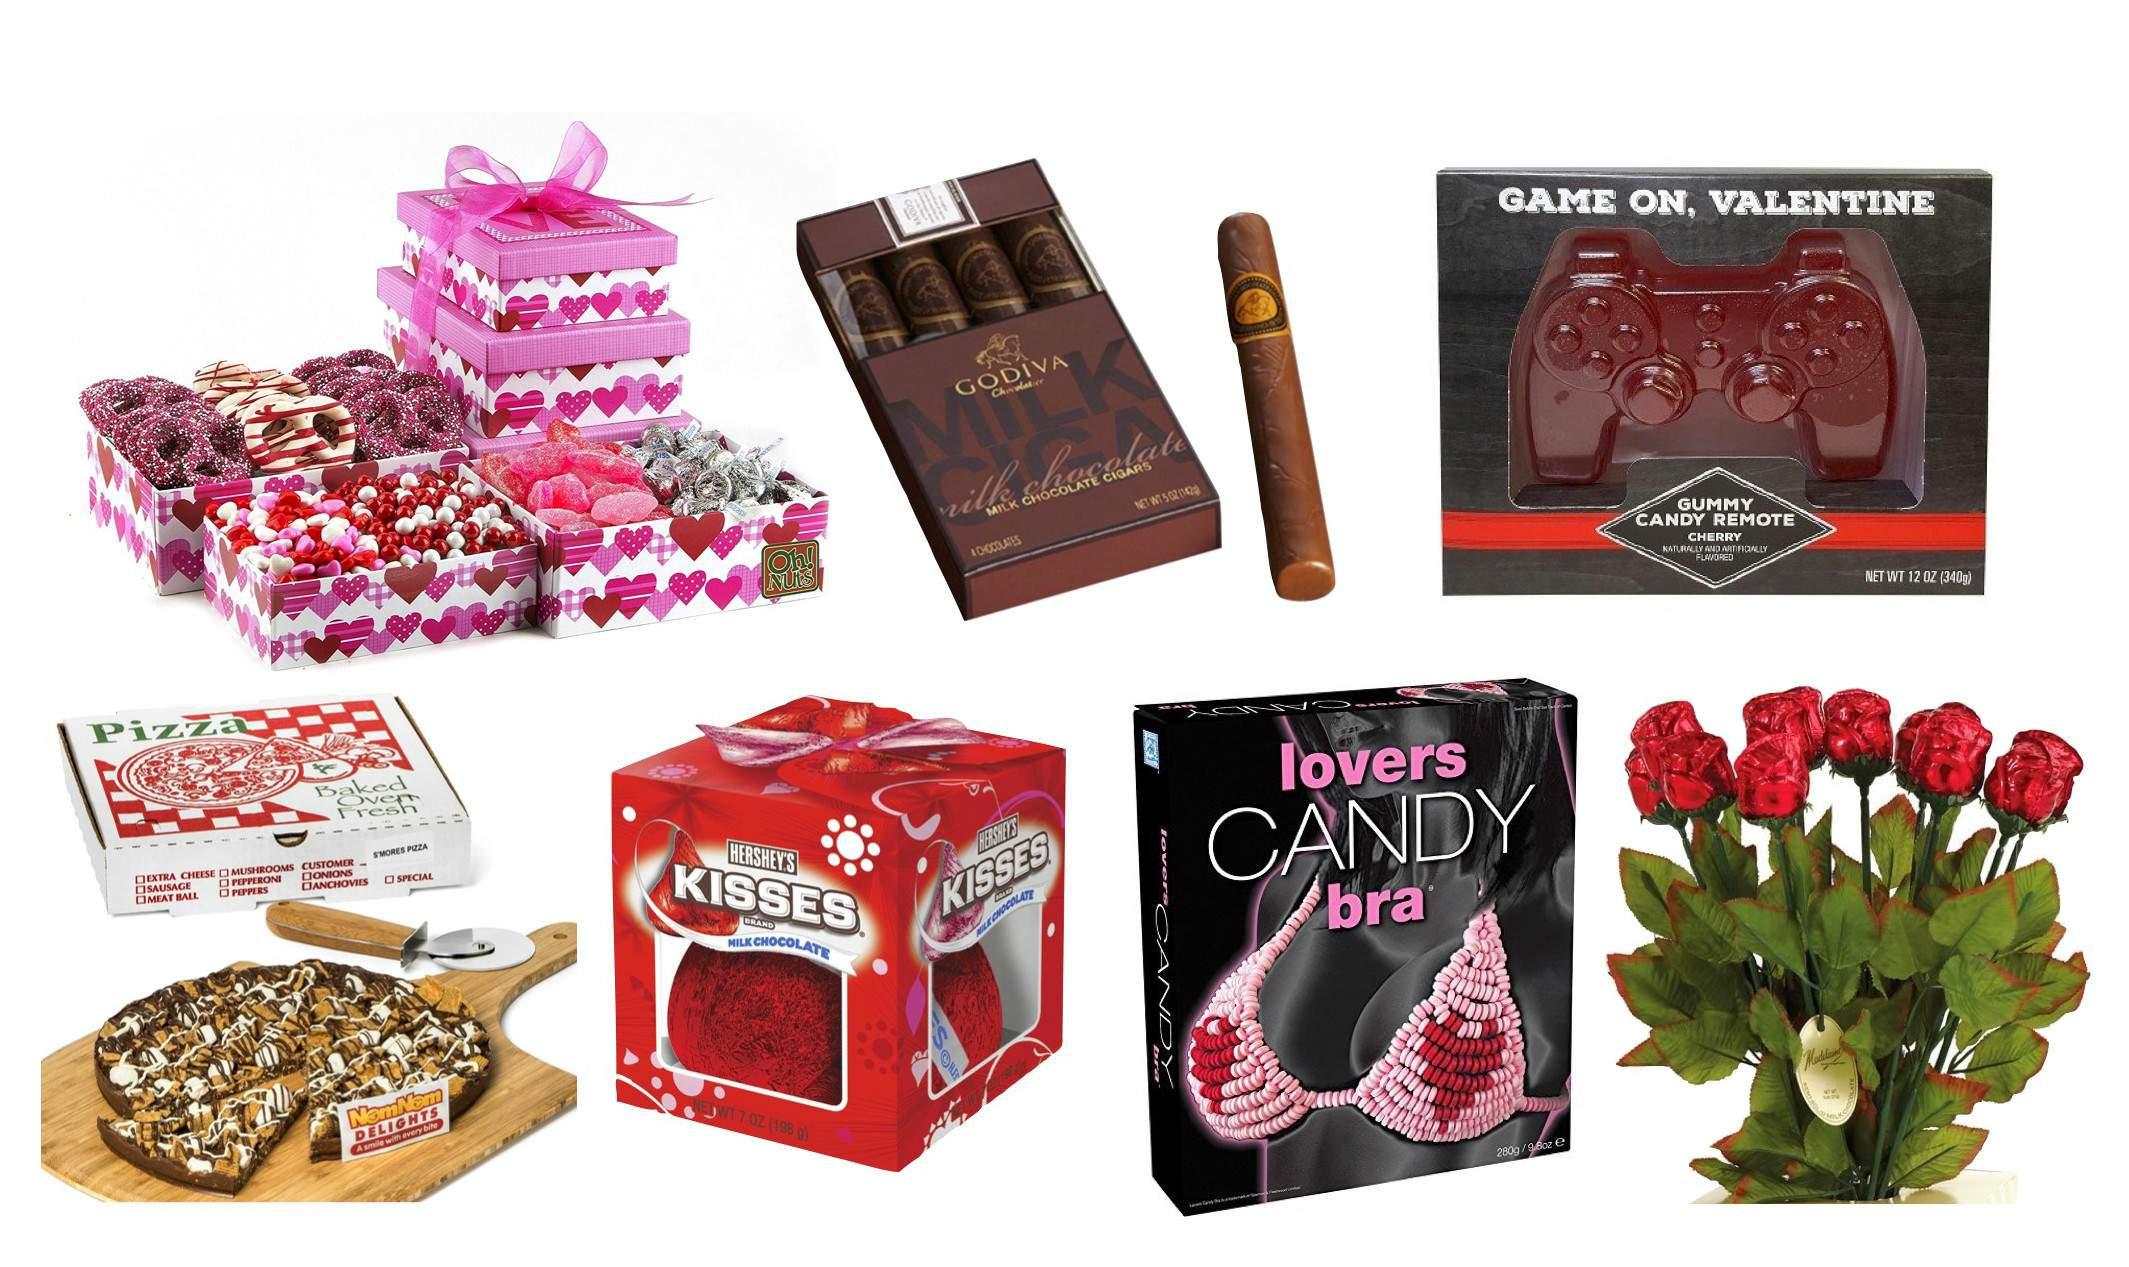 Valentine Gift Ideas For Girlfriend
 Traditional Gifts for Your Girlfriend But With A Twist